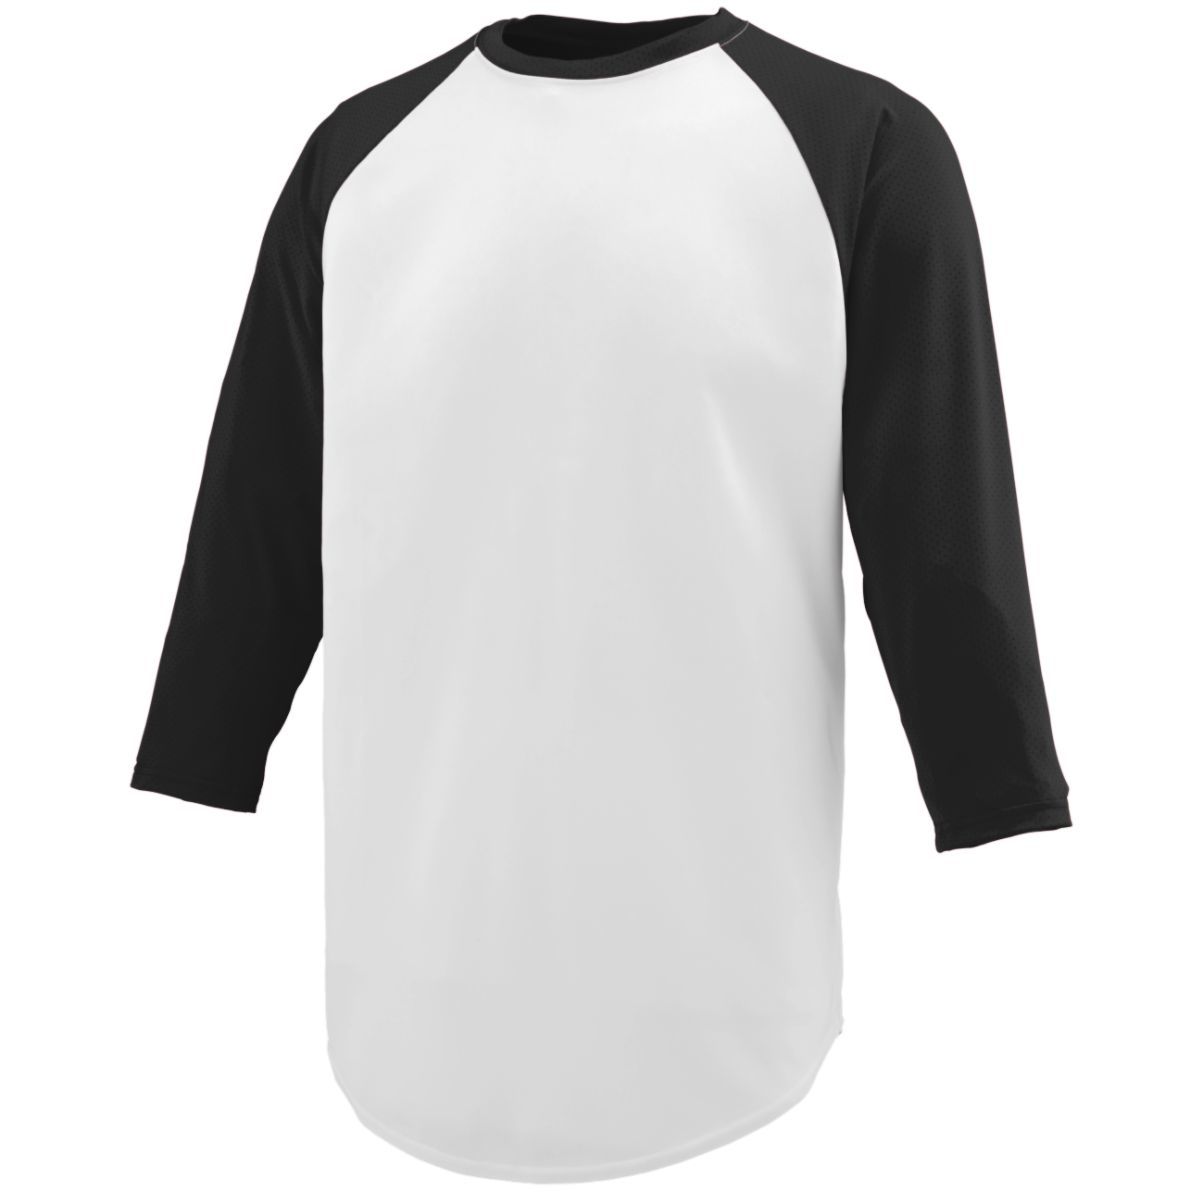 Augusta Sportswear Nova Jersey in White/Black  -Part of the Adult, Adult-Jersey, Augusta-Products, Baseball, Shirts, All-Sports, All-Sports-1 product lines at KanaleyCreations.com